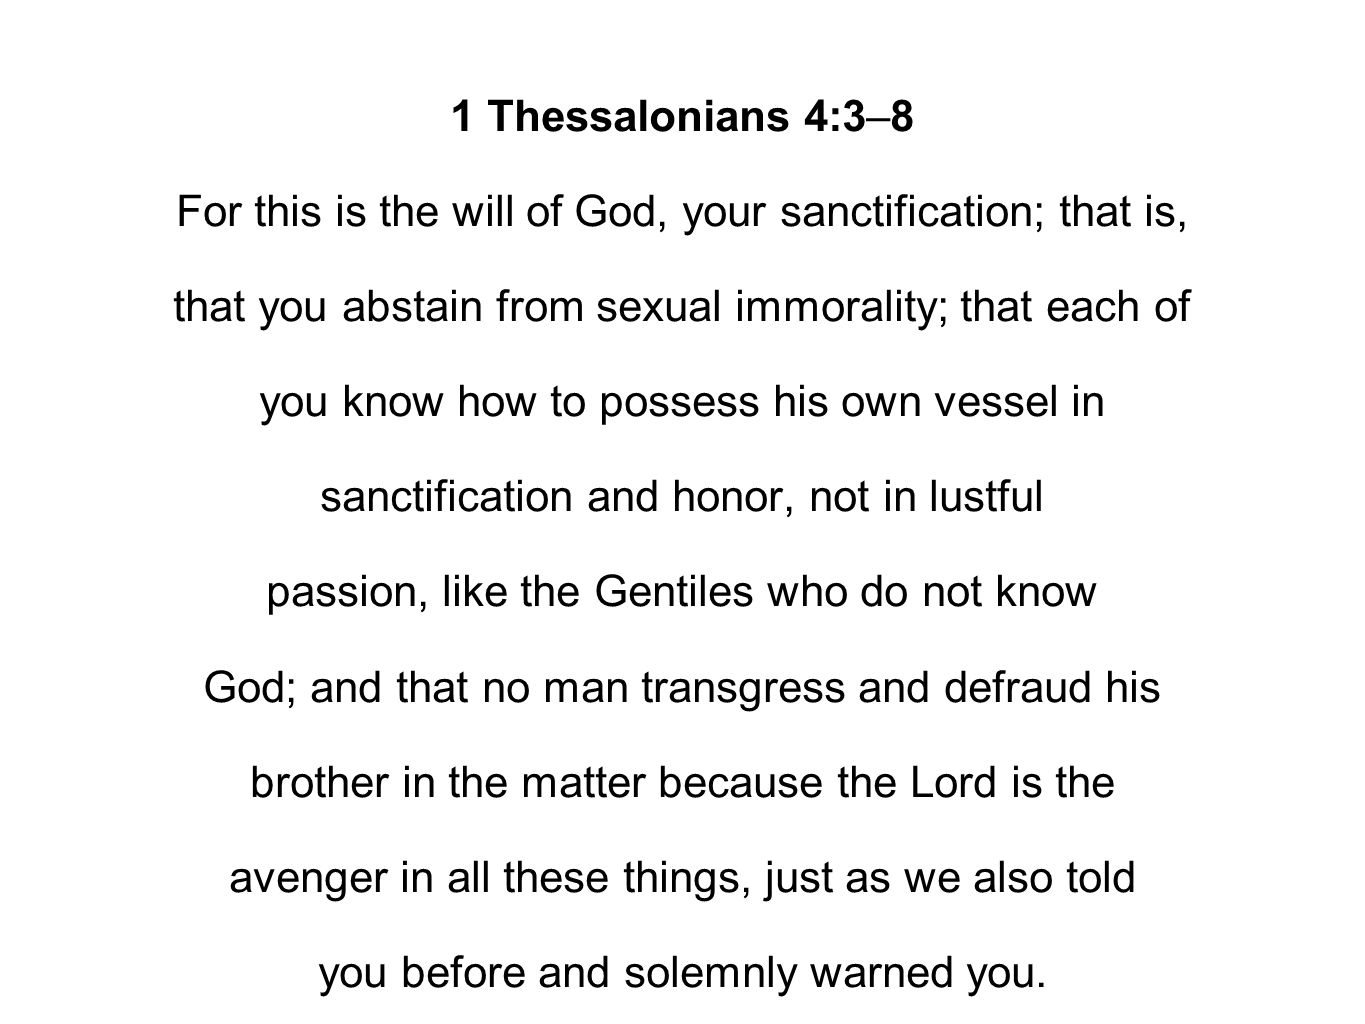 1 Thessalonians 4:3–8 For this is the will of God, your sanctification; that is, that you abstain from sexual immorality; that each of you know how to possess his own vessel in sanctification and honor, not in lustful passion, like the Gentiles who do not know God; and that no man transgress and defraud his brother in the matter because the Lord is the avenger in all these things, just as we also told you before and solemnly warned you.